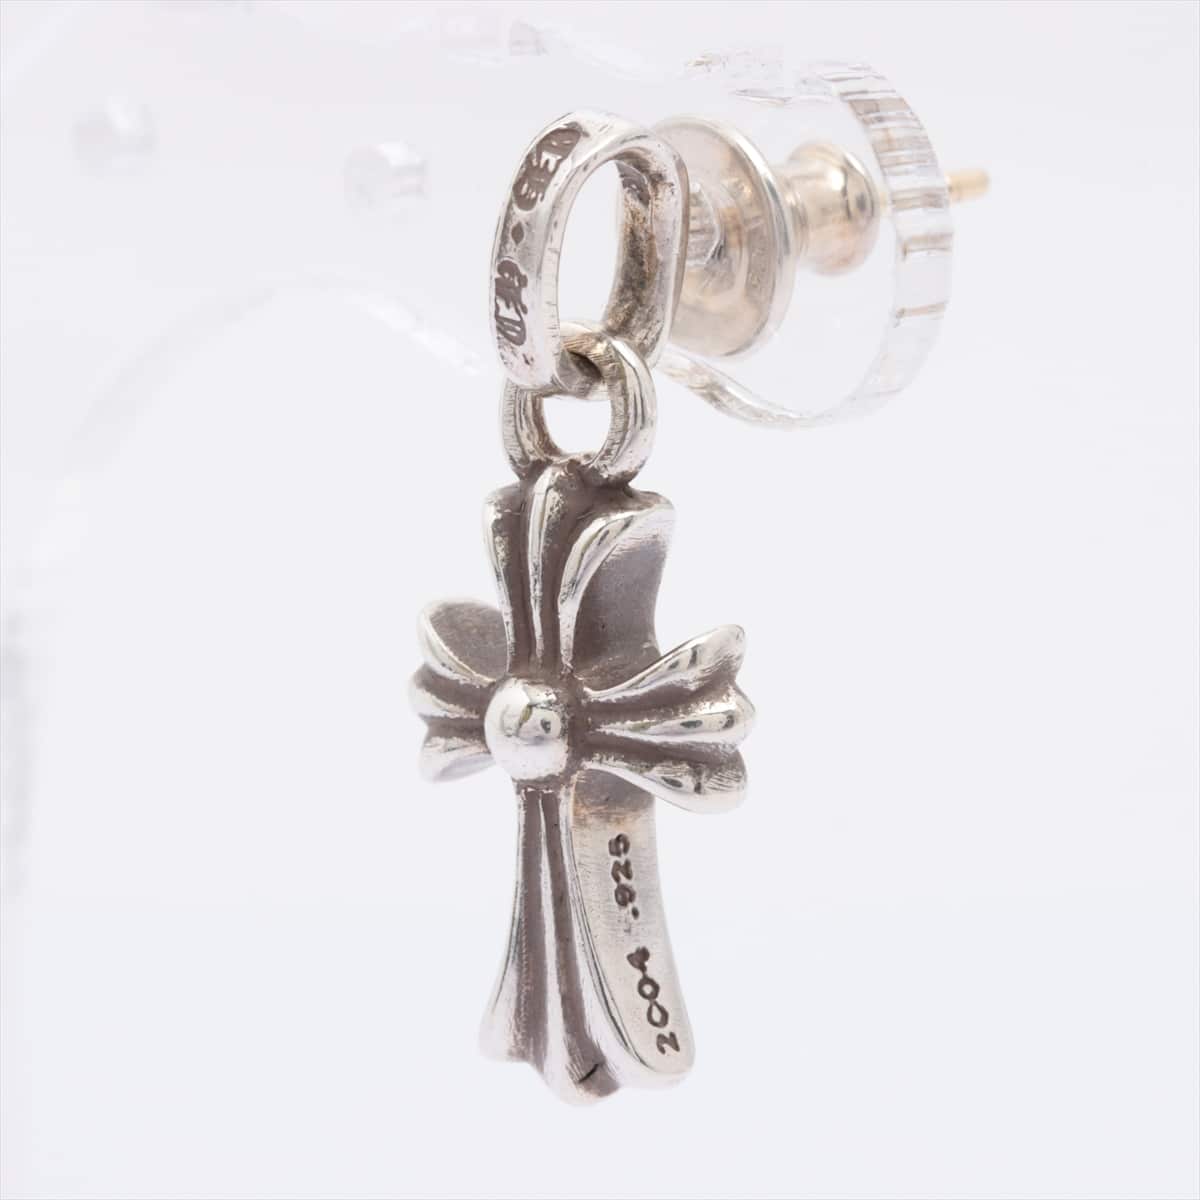 Chrome Hearts CH Cross Baby fat charms Piercing jewelry 925×14K 2.5g With invoice